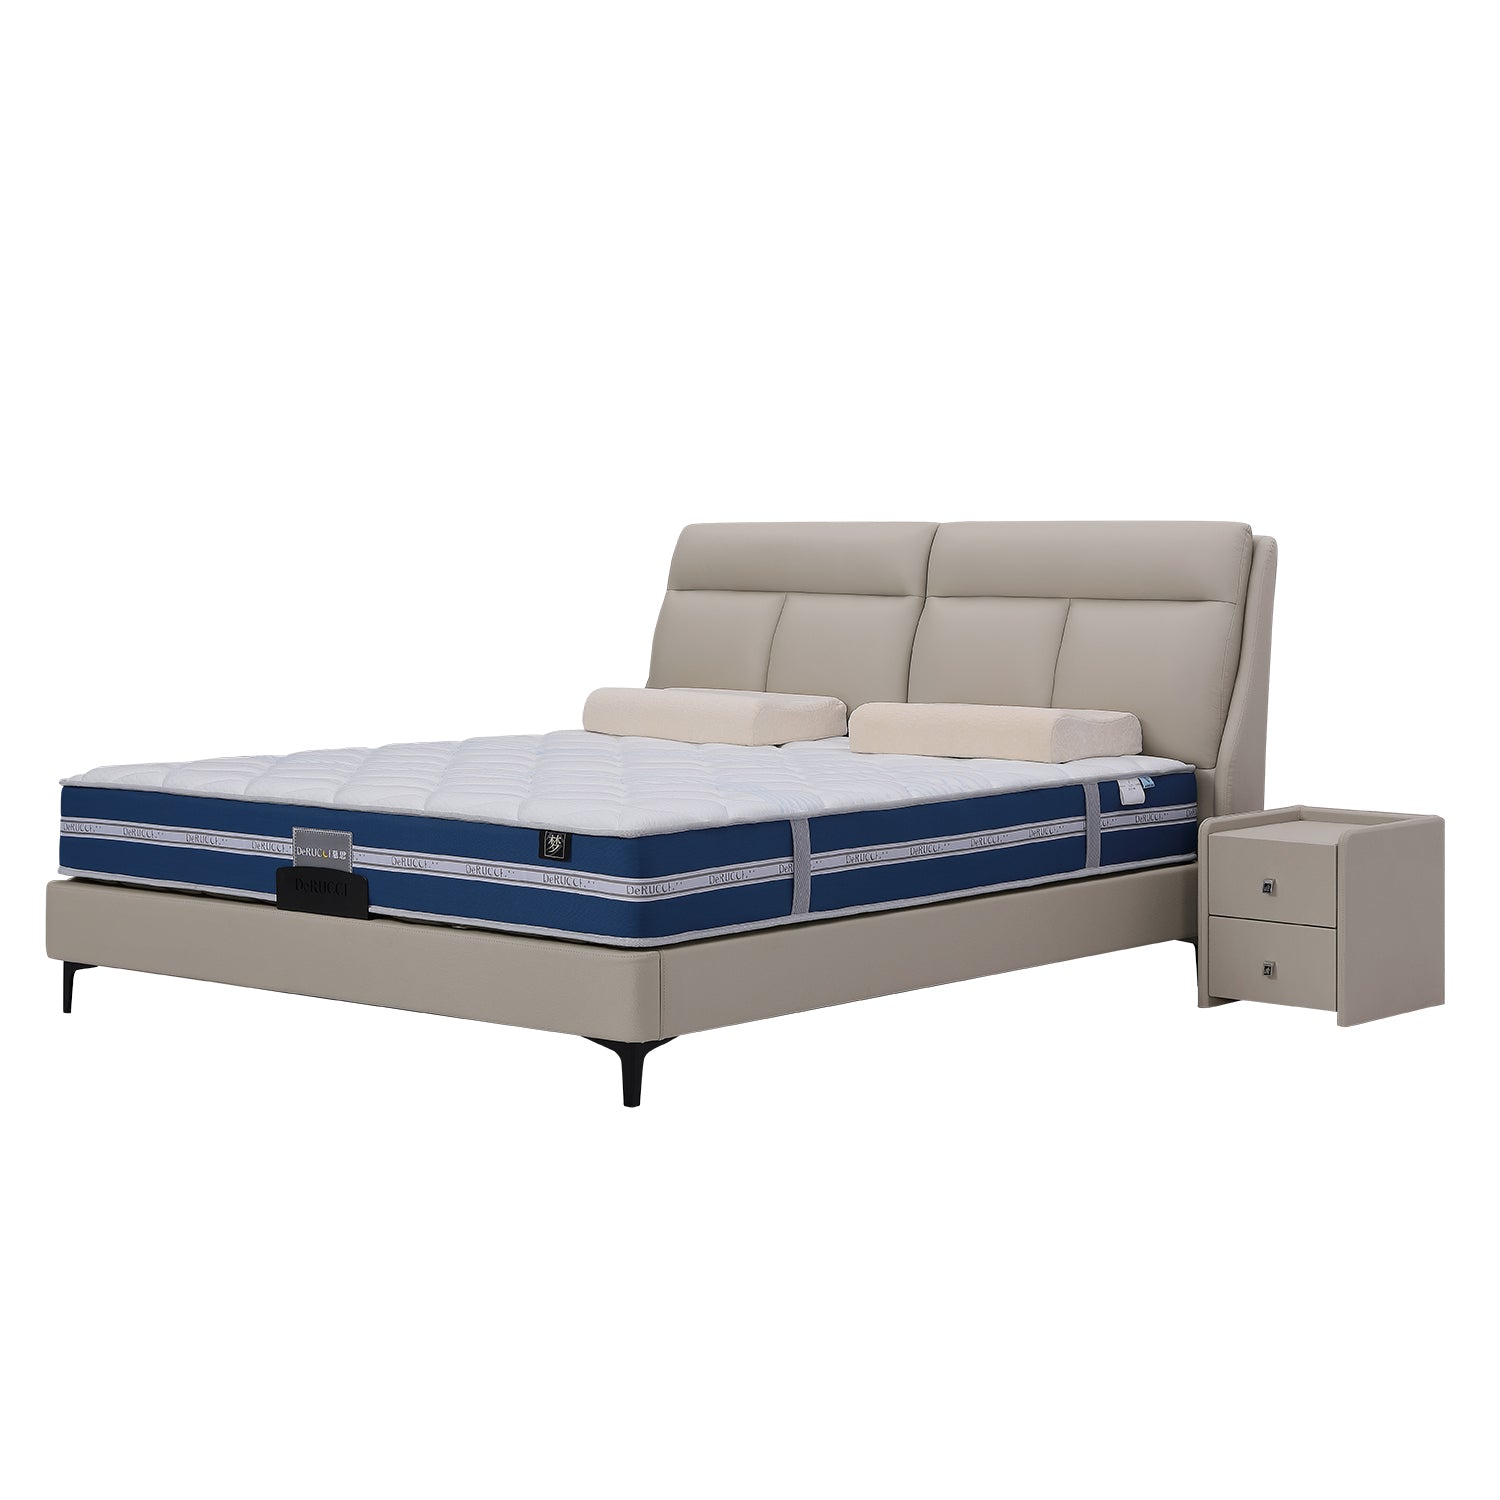 Modern beige DeRUCCI bed frame BOC1 - 002 with upholstered headboard, blue and white mattress, white pillows, and matching beige nightstand